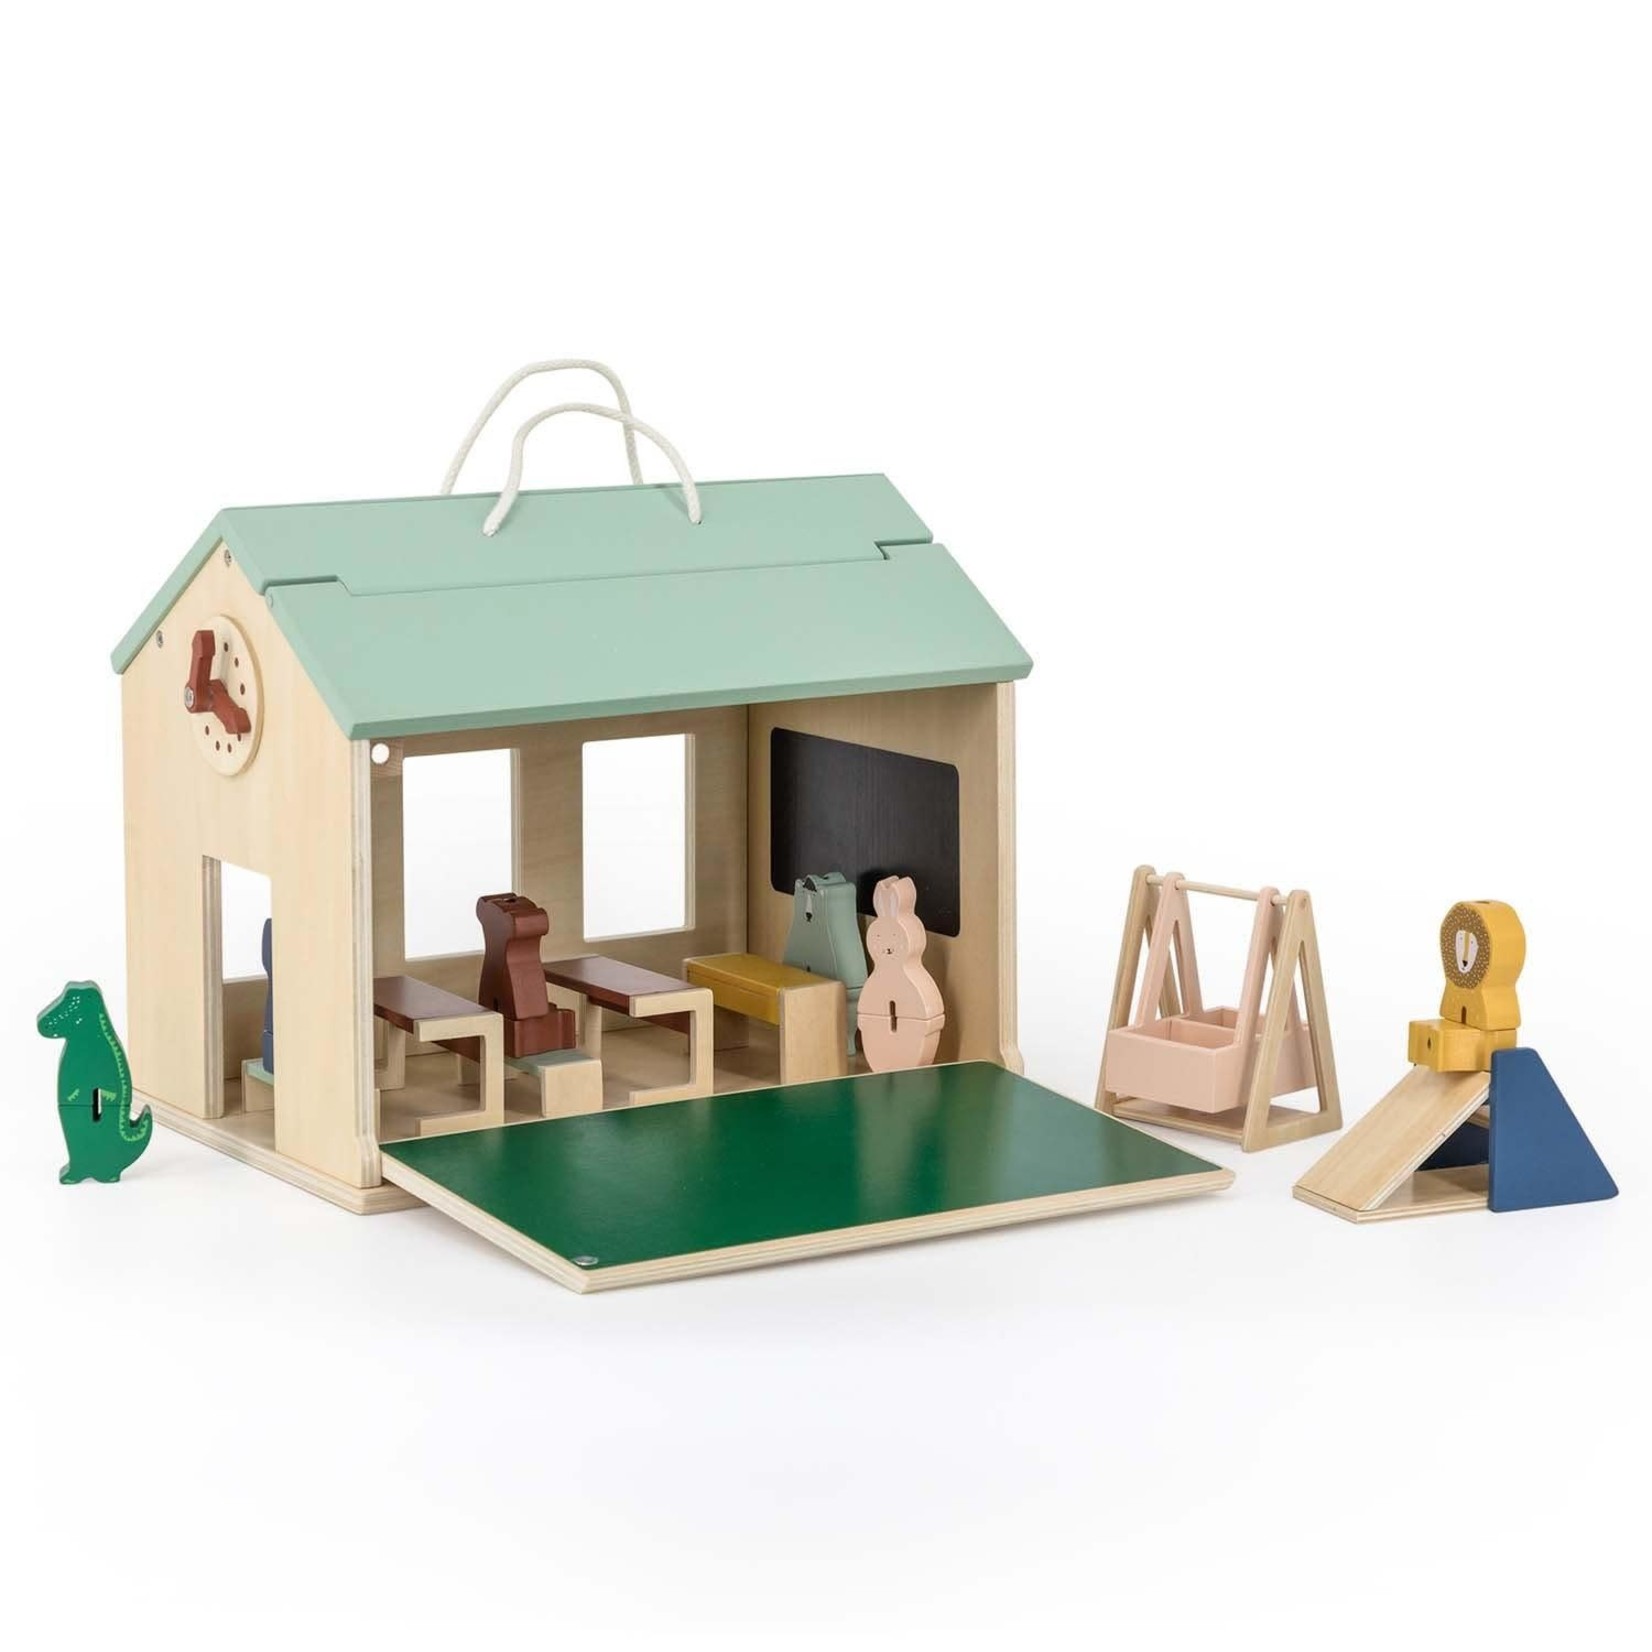 Trixie Trixie - Wooden school with accessories SHOWMODEL